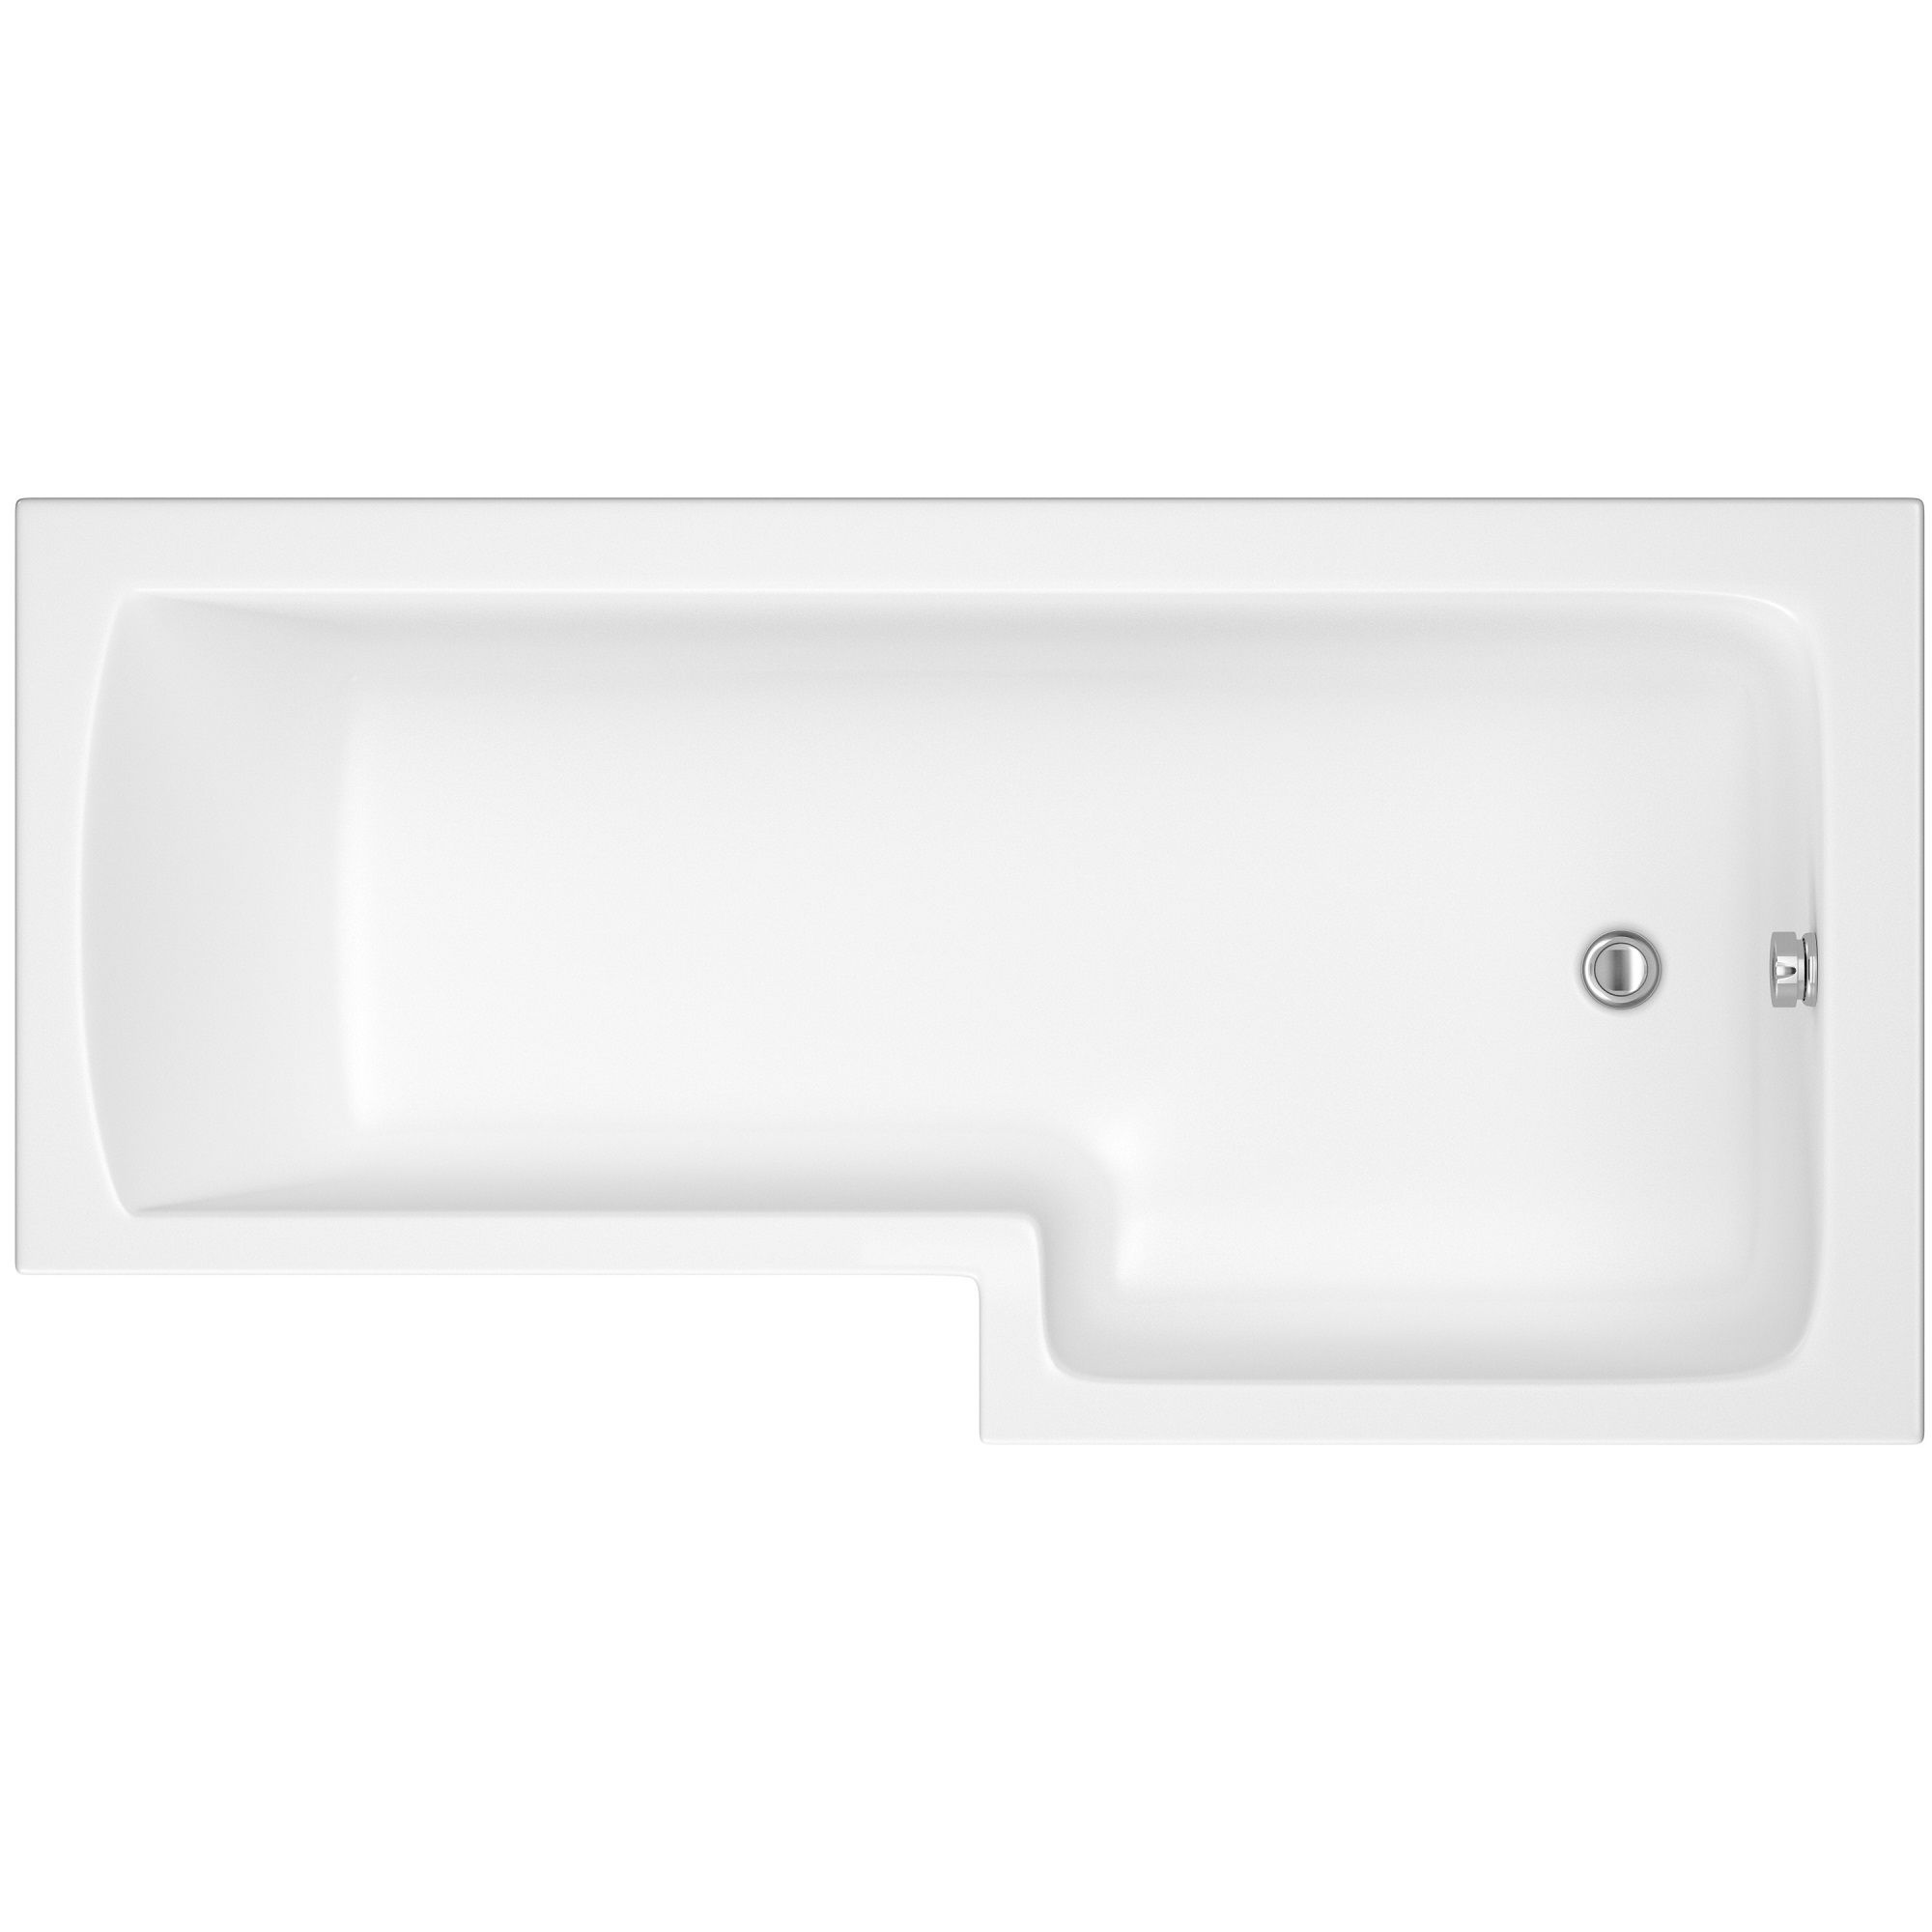 Cooke & Lewis Solarna White L-shaped Right-handed Shower Bath, panel & screen set